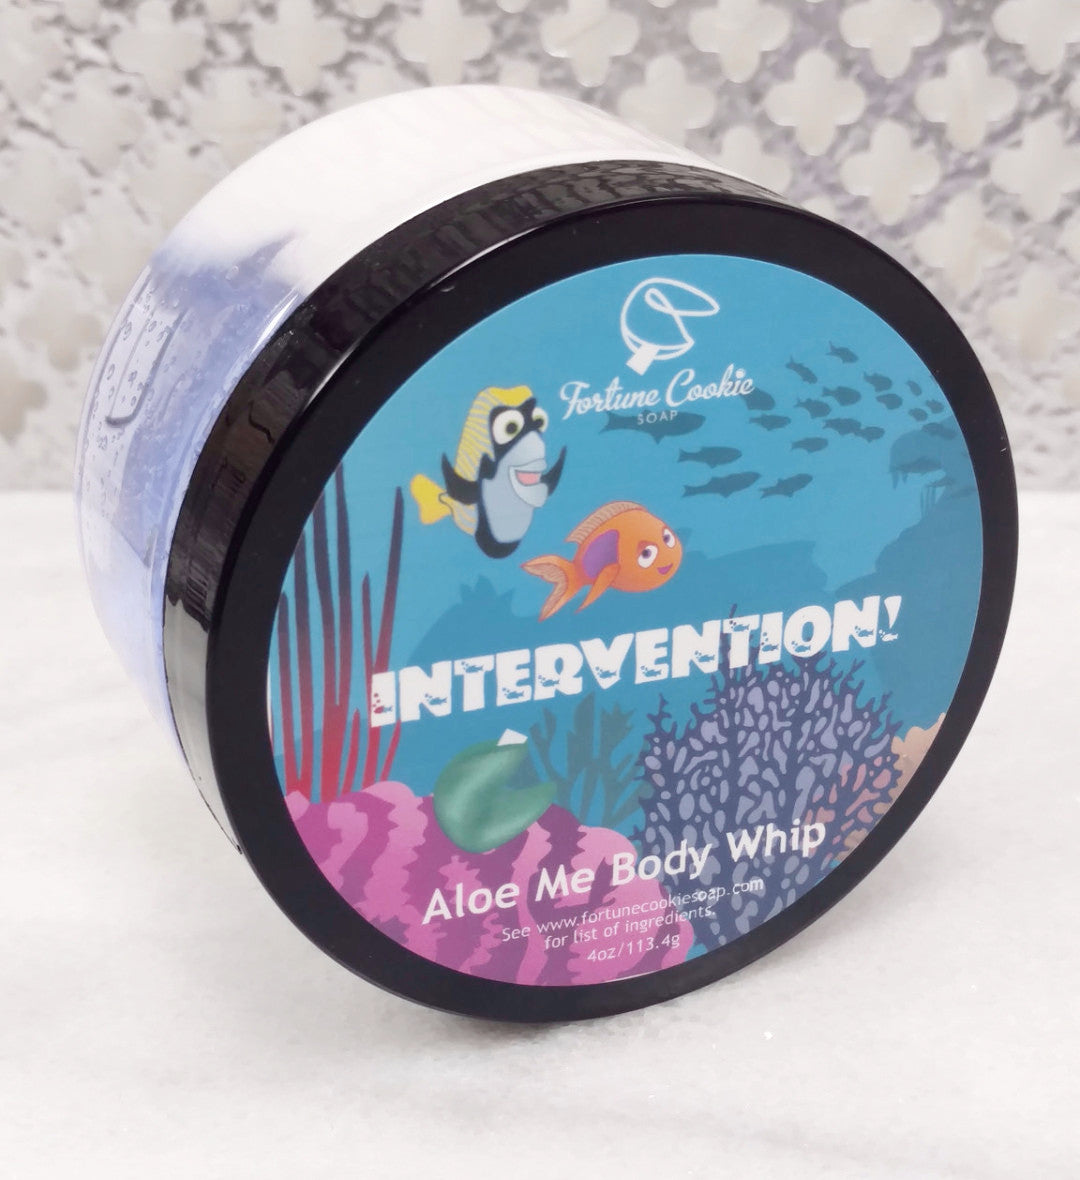 INTERVENTION Aloe Me Body Whip - Fortune Cookie Soap - 1